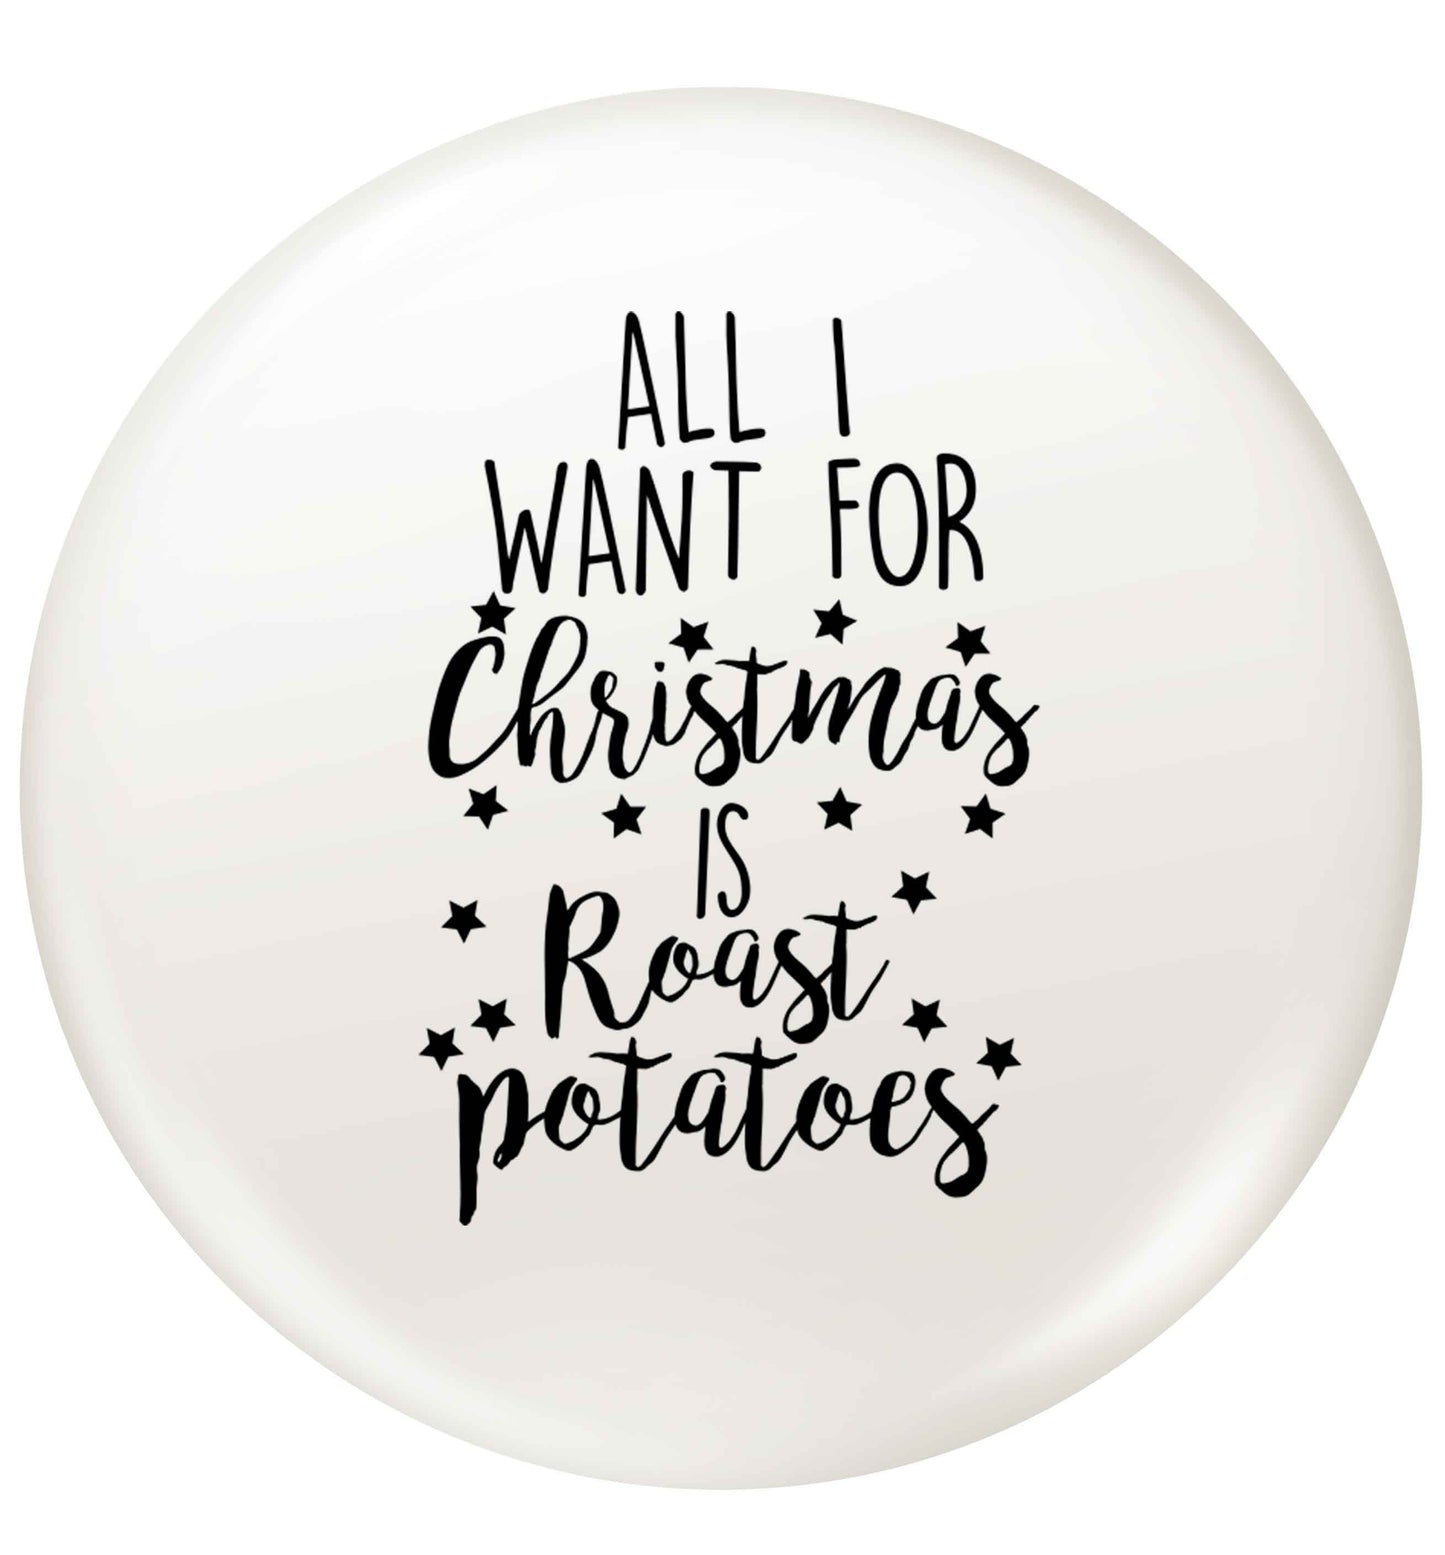 All I want for Christmas is roast potatoes small 25mm Pin badge